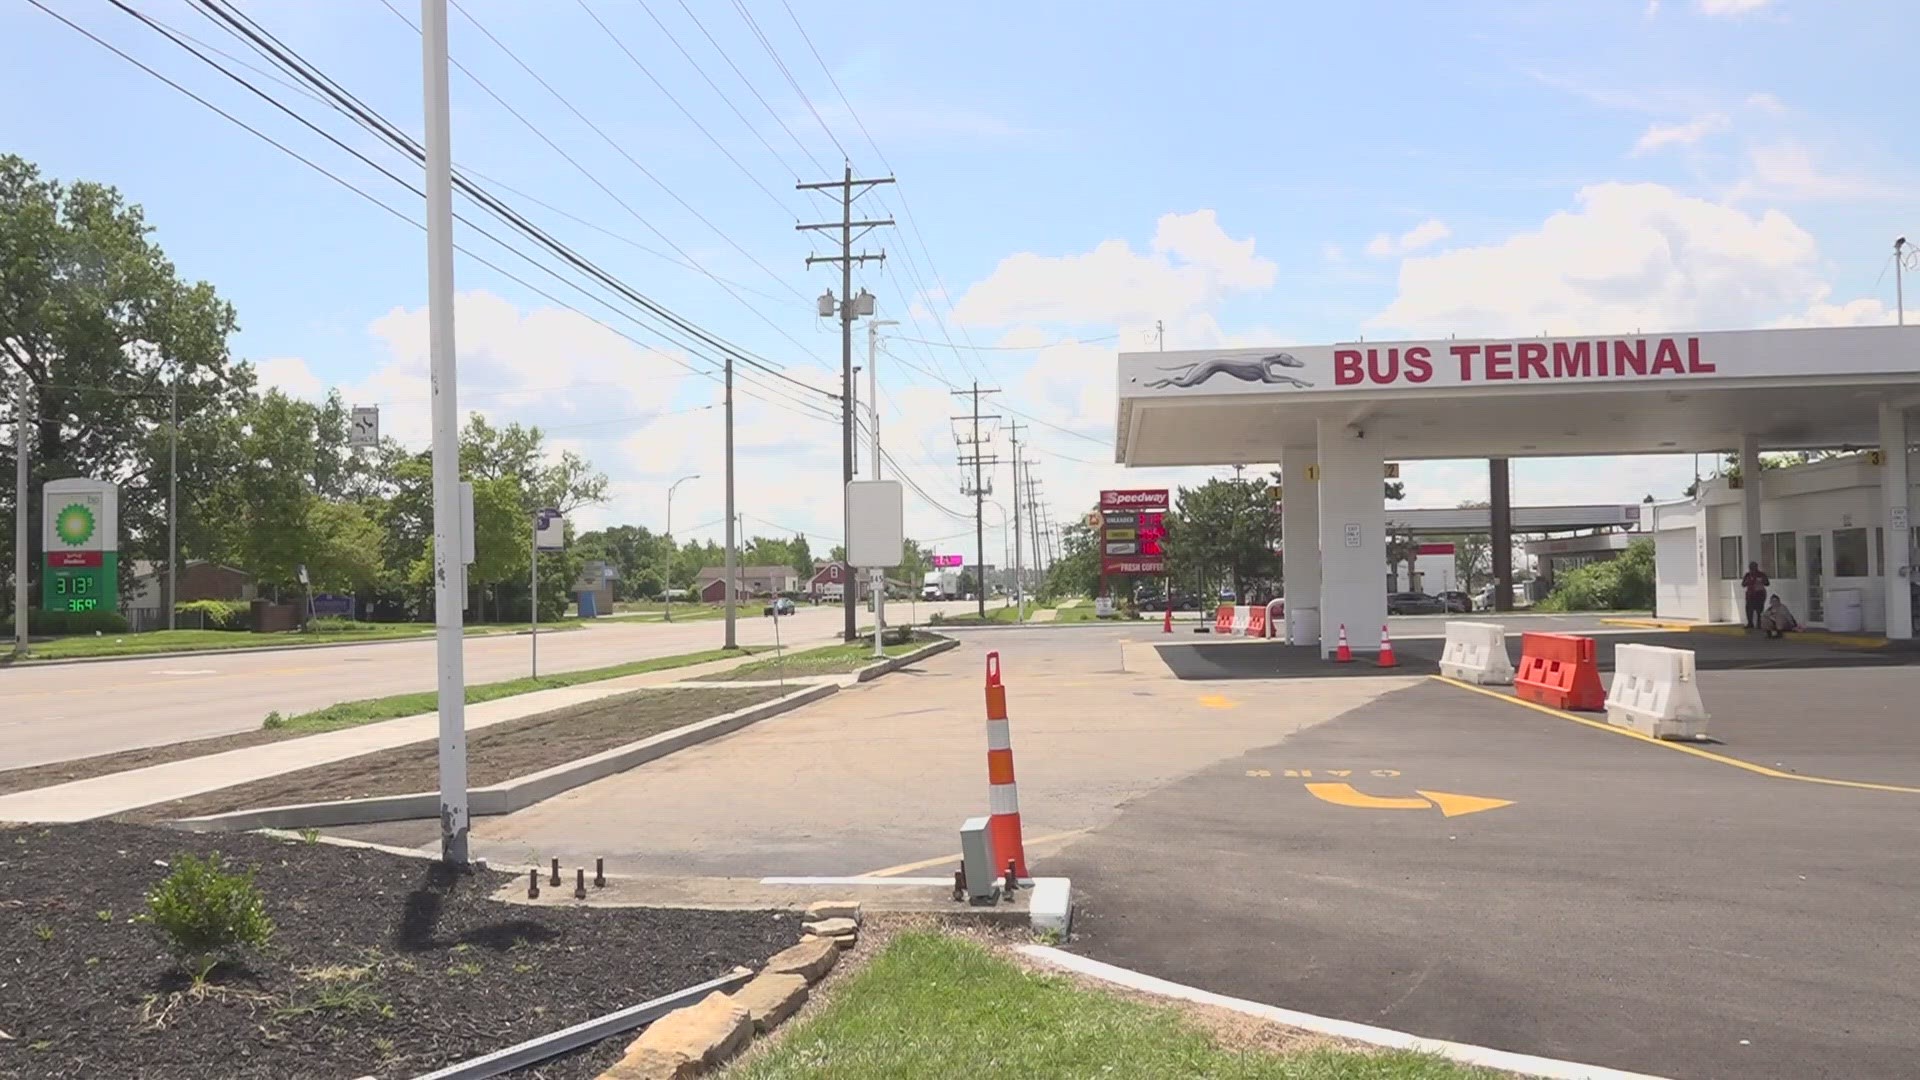 Columbus City Attorney Zach Klein announced the agreement Friday, stating that it will prohibit the pickup and drop-off of passengers at the Wilson Road facility.